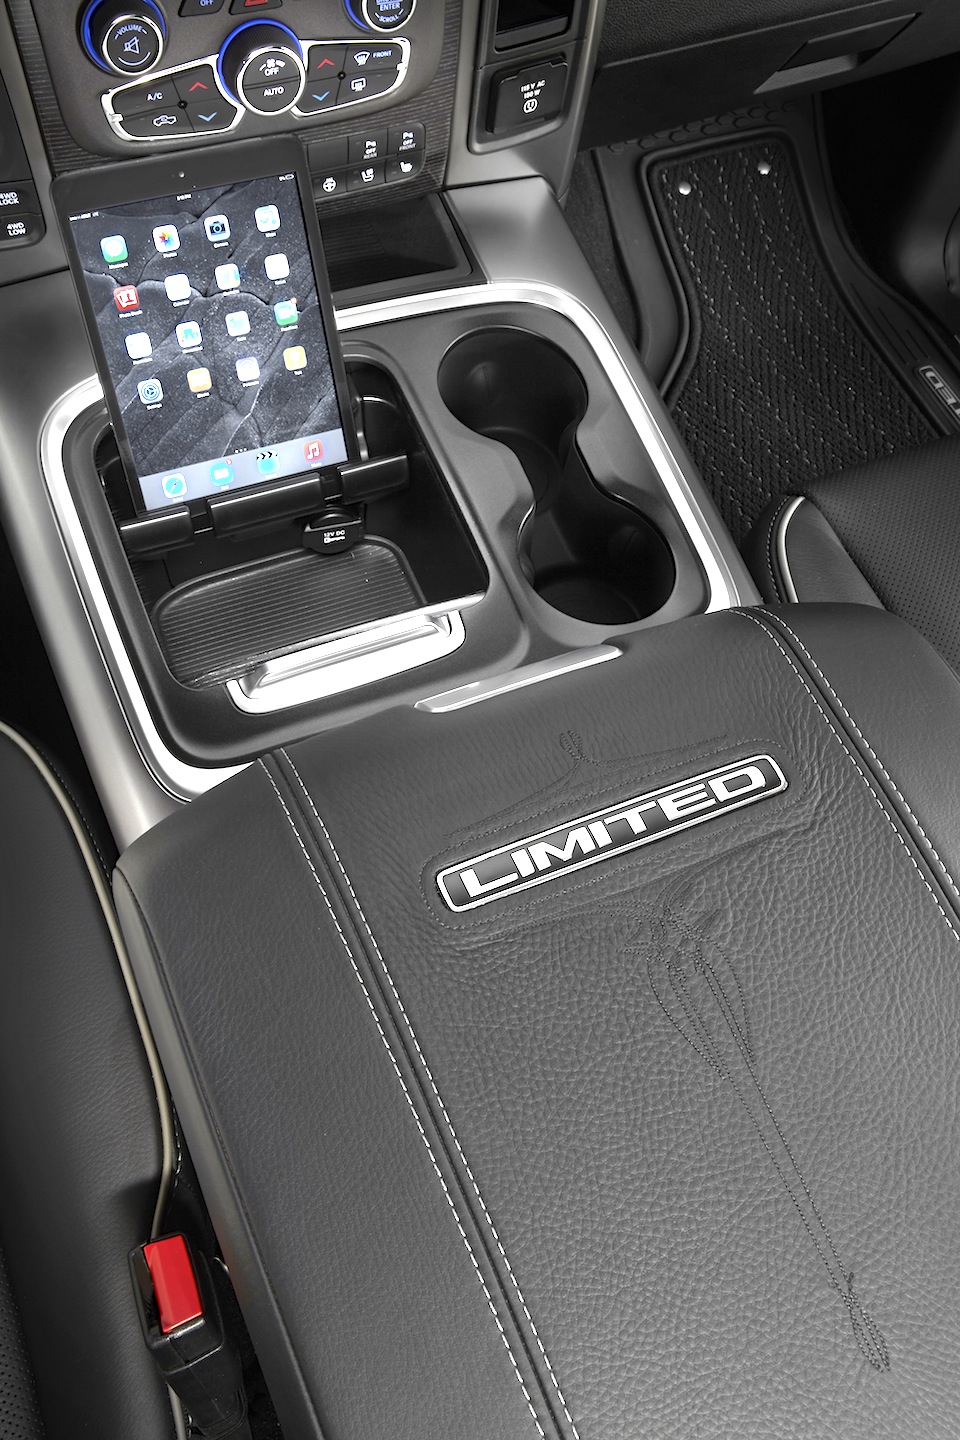 2015 Ram 1500 Laramie Limited - The Fast Lane Truck 2015 Ram 1500 Center Console Removal